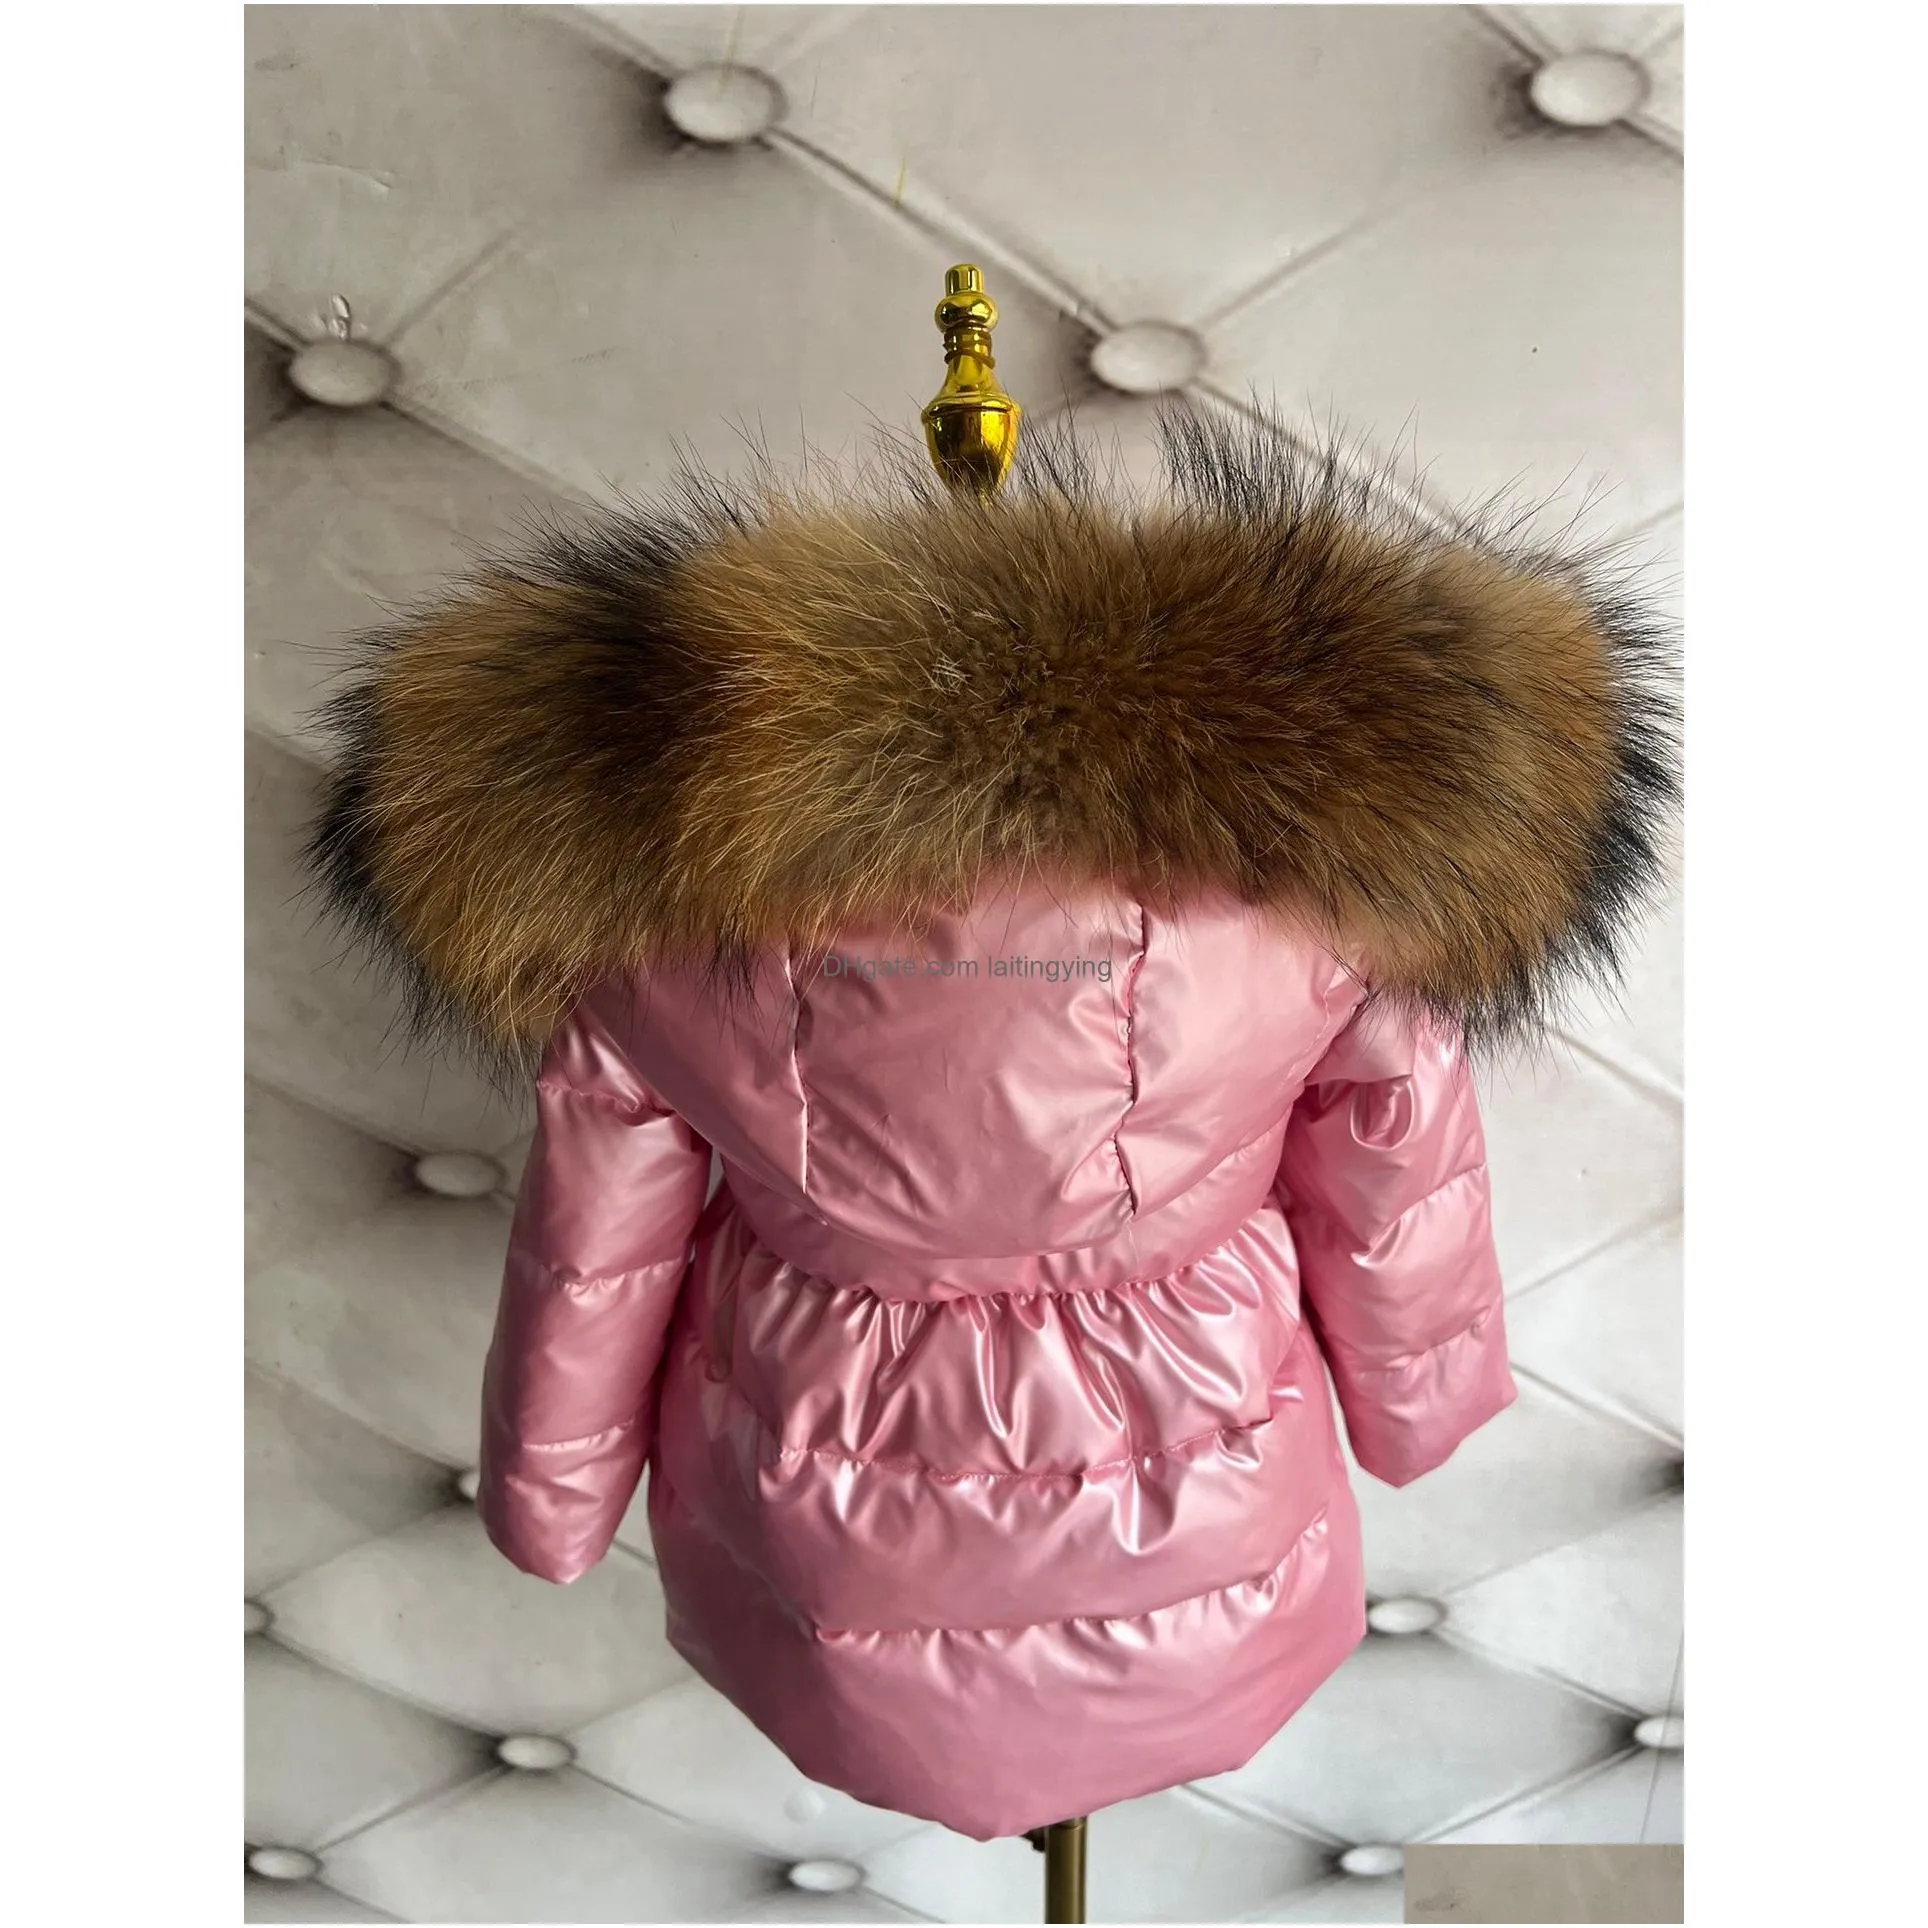 top quality kids baby girl down coat winter large fur collar parka duck down jacket warm thickened overcoat children clothing